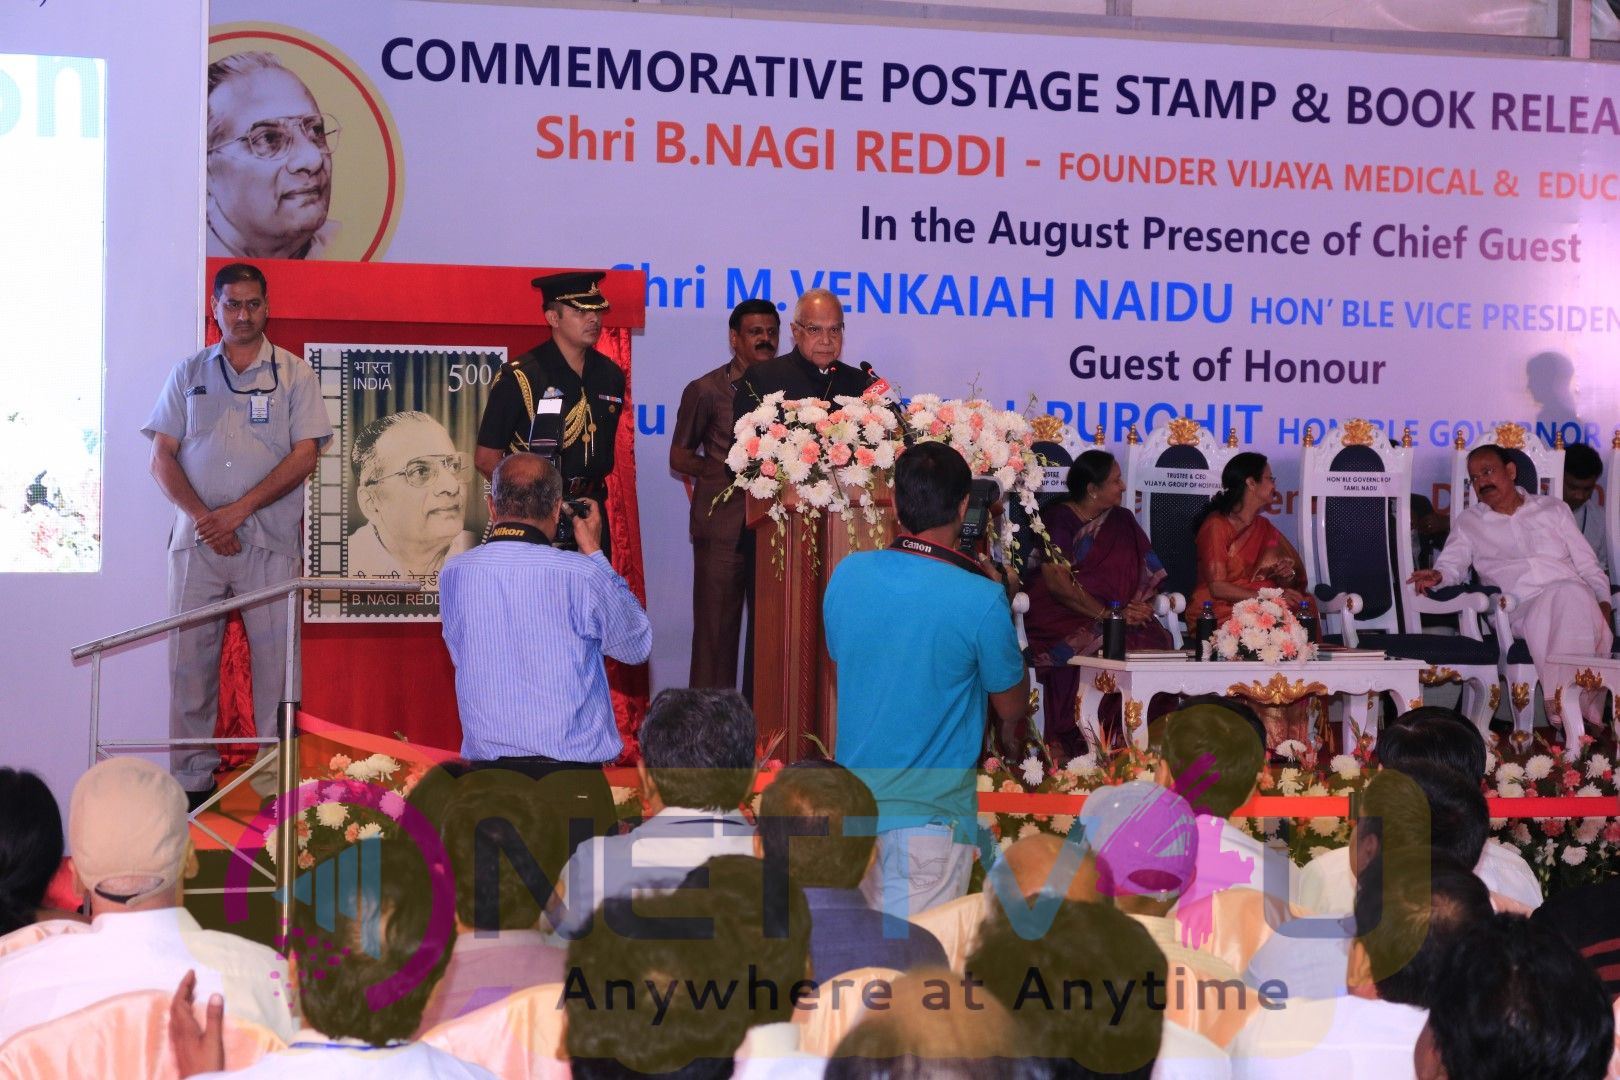 Commemorative Postage Stamp And Book Release Function On B Nagi Reddy Event Photos Telugu Gallery